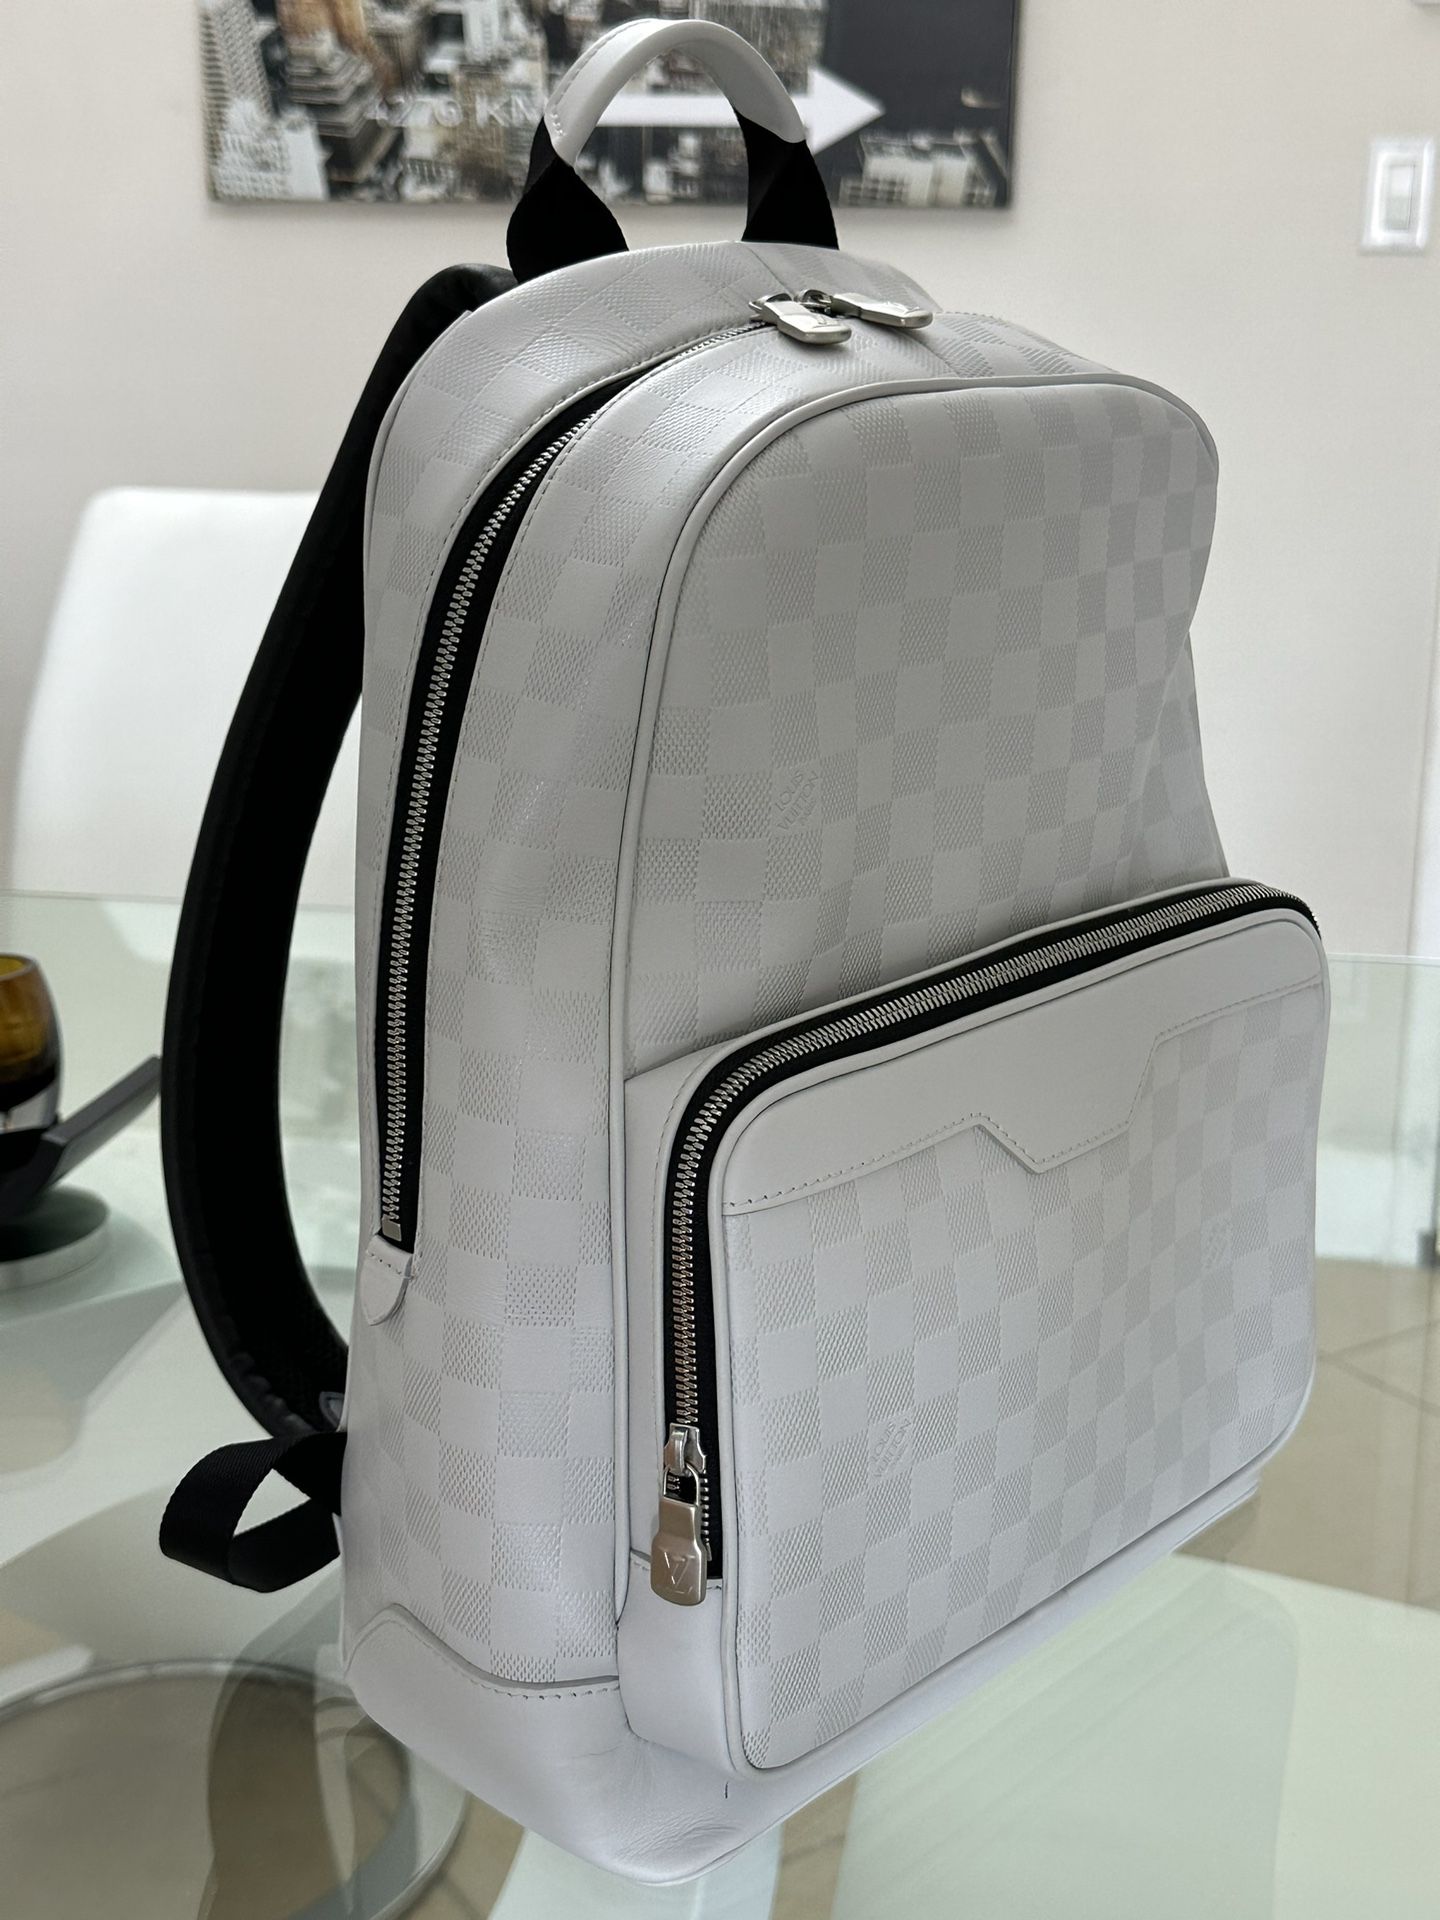 campus backpack louis vuitton